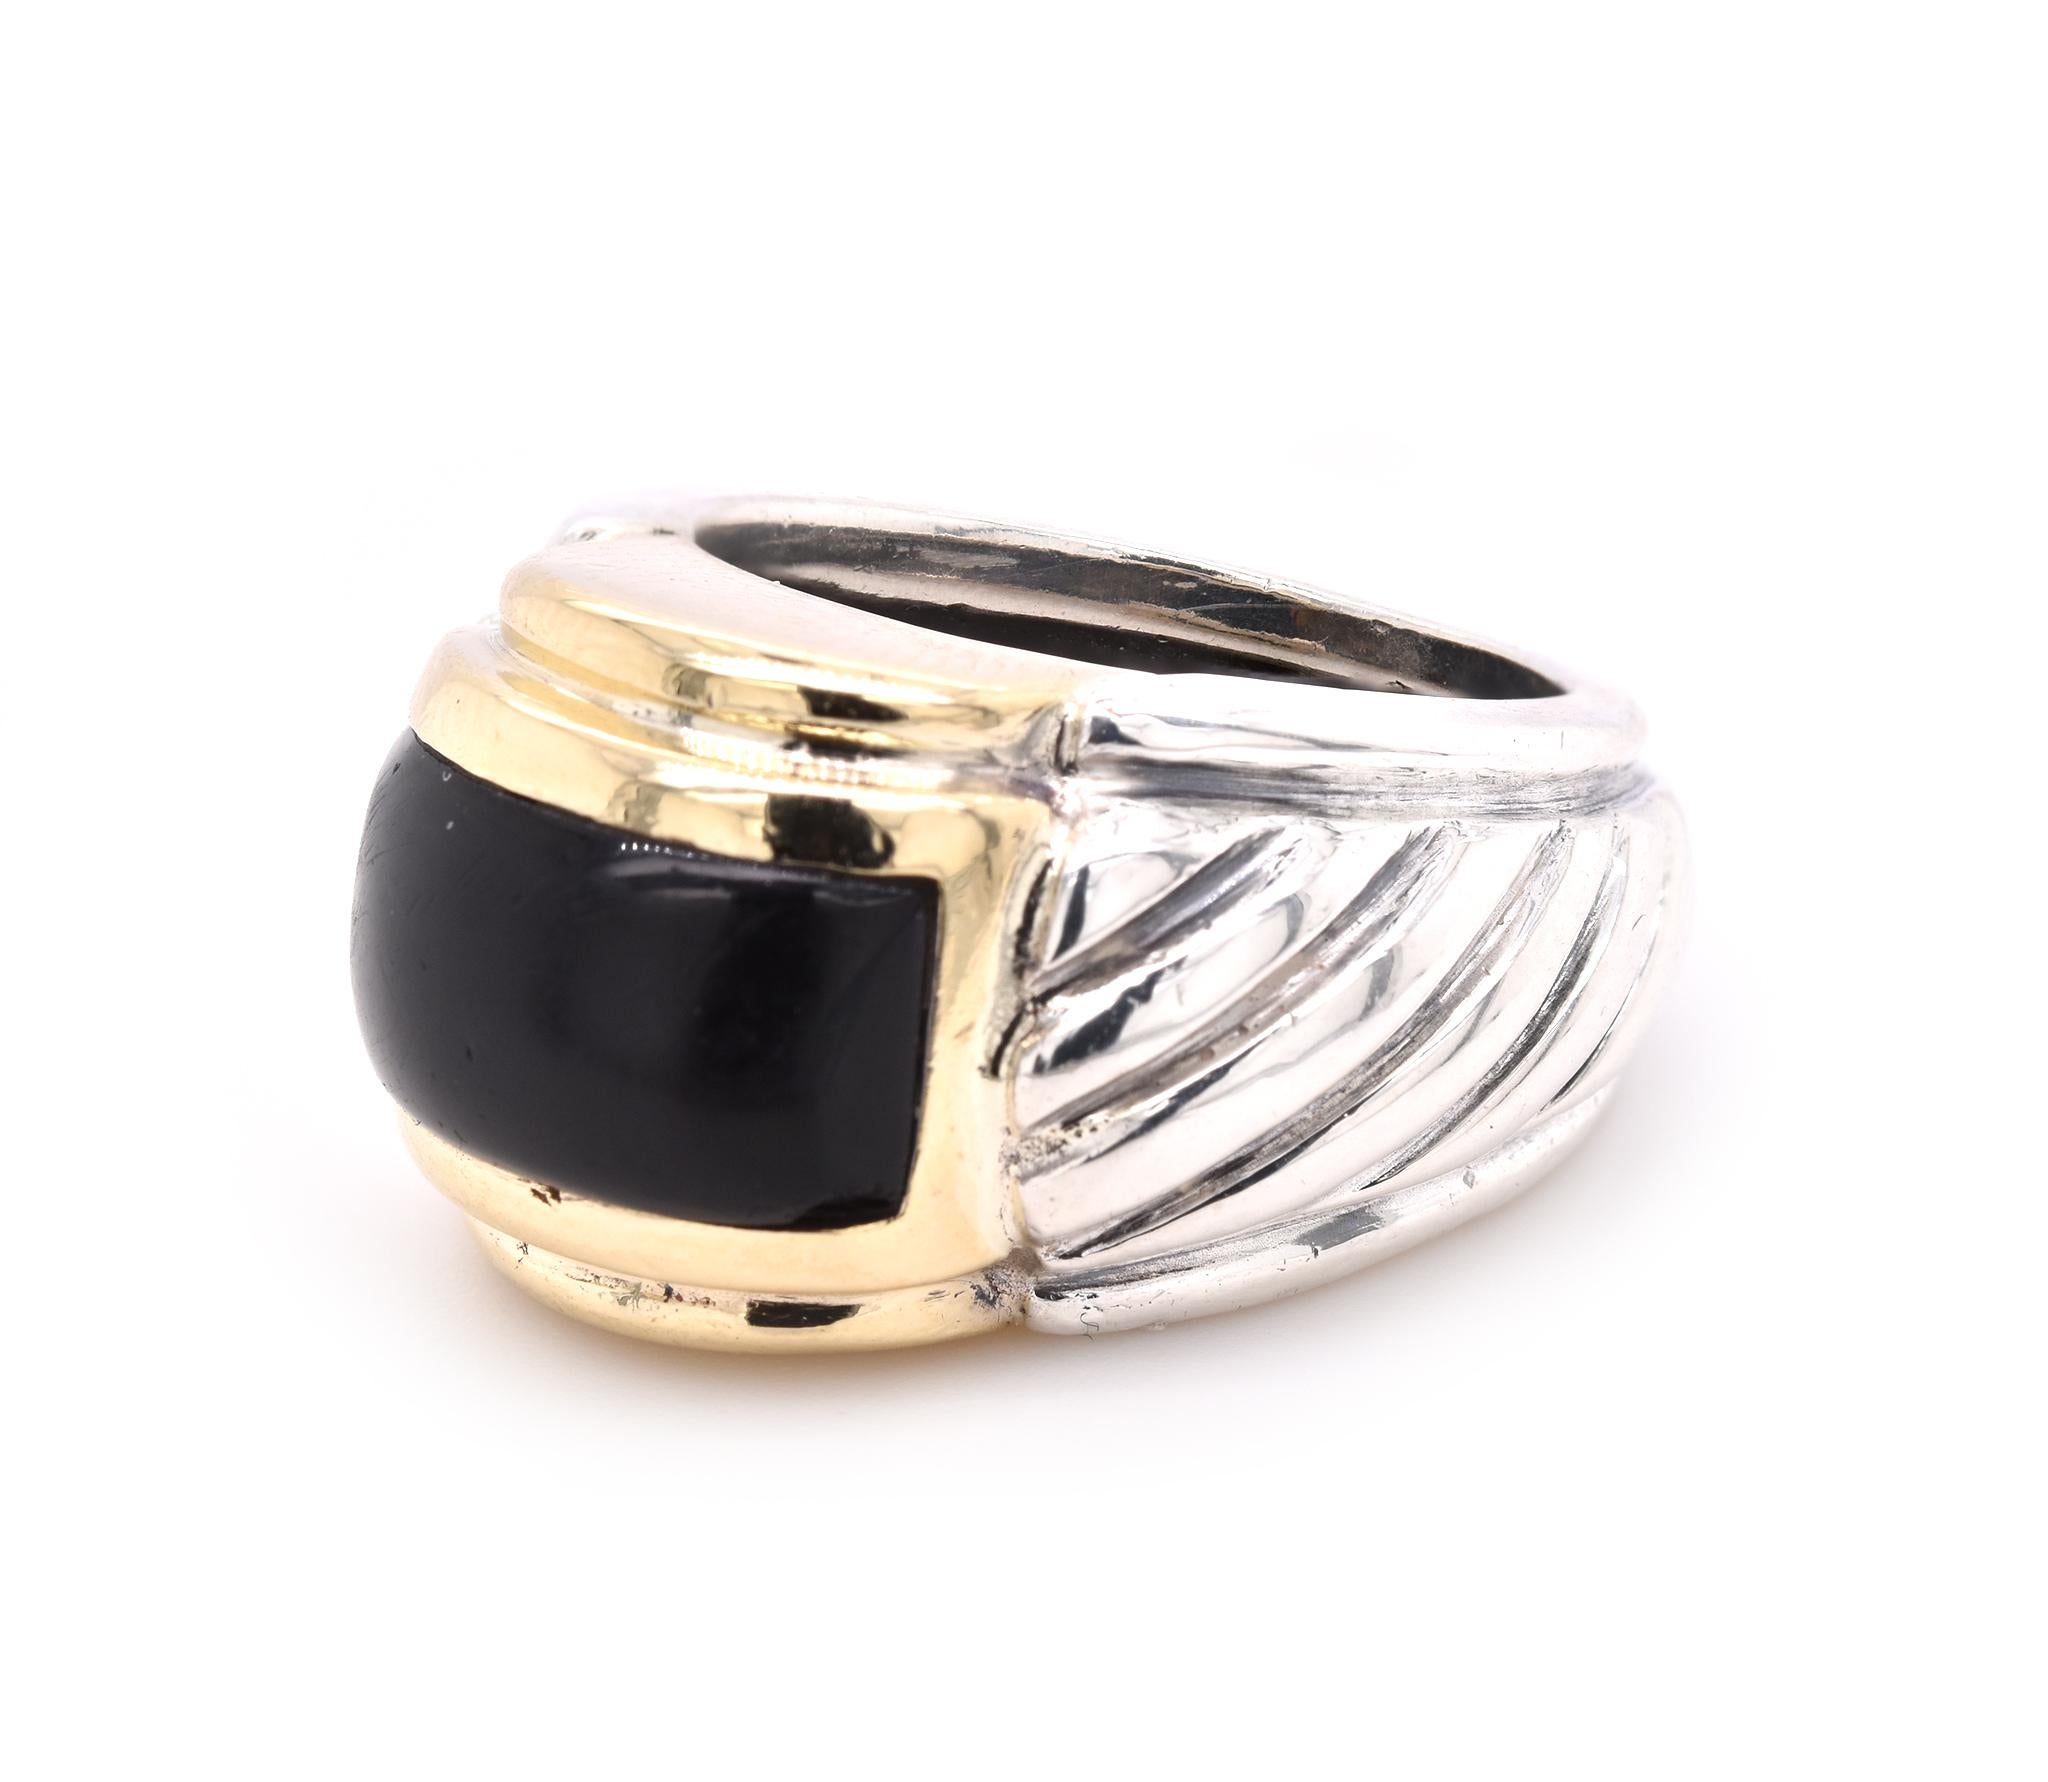 Material: sterling silver & 14K yellow gold
Ring size: 7 (please allow up to two additional business days for sizing requests)
Dimensions: ring top measures 13.80mm wide
Weight: 17.50 grams
